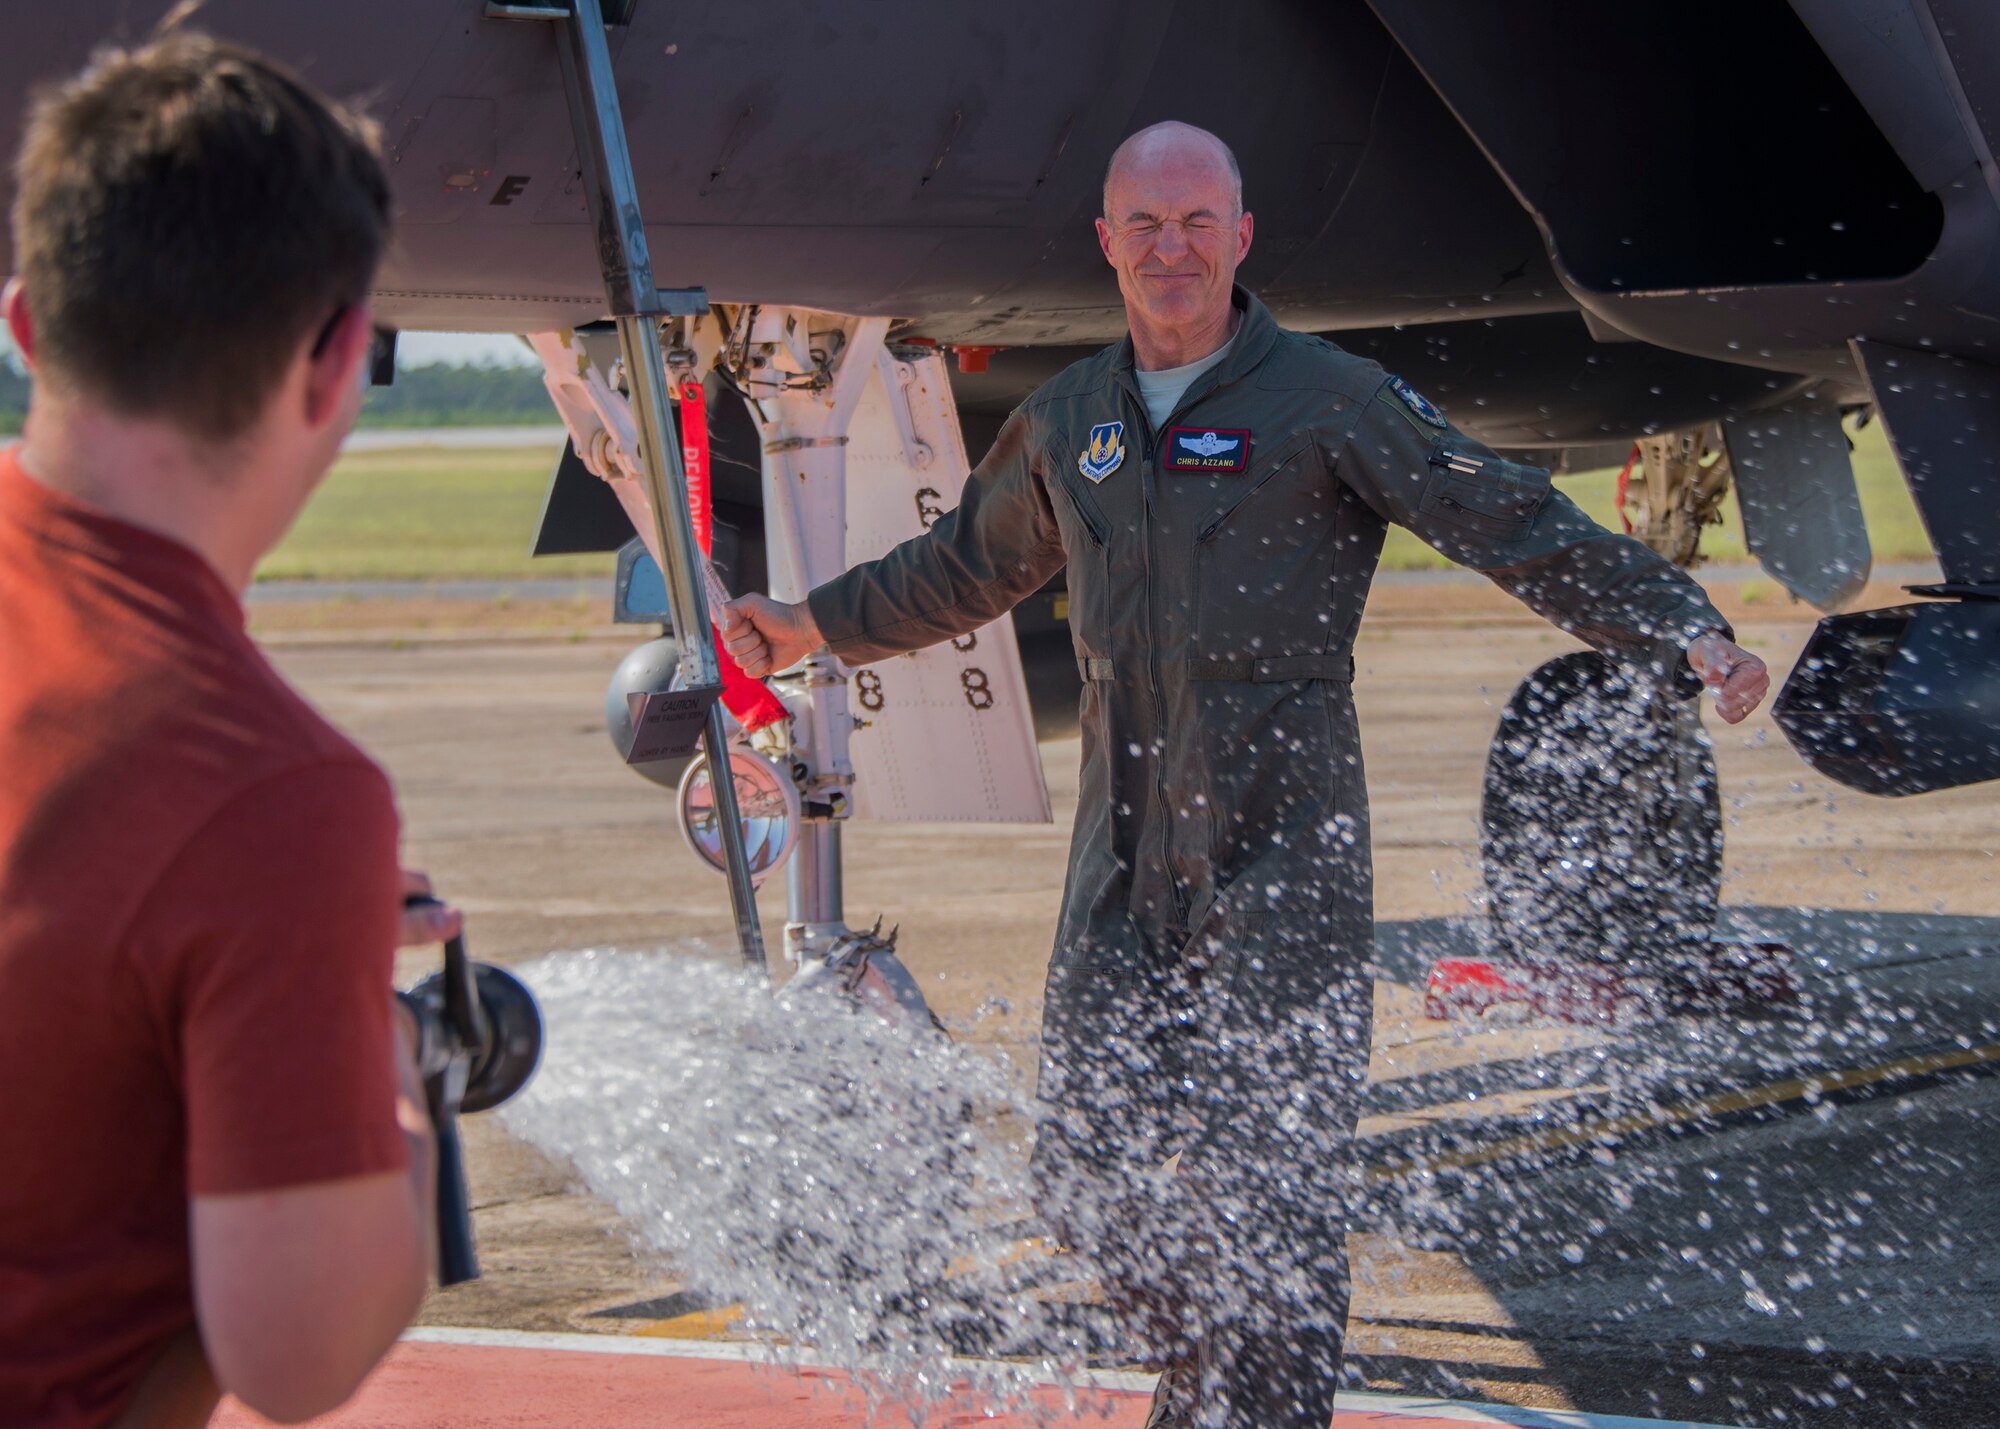 Brig. Gen. Christopher Azzano, 96th Test Wing commander, braces for a soaking while his son, Steven, hoses him down during his fini flight at Eglin Air Force Base, Fla. May 15. The fini flight is a symbol of a member’s final flight with the unit or base. Azzano’s new assignment will take him to Wright-Patterson Air Force Base in Ohio to take command of the Directorate of Air, Space and Cyberspace Operations. (U.S. Air Force photo/Ilka Cole)